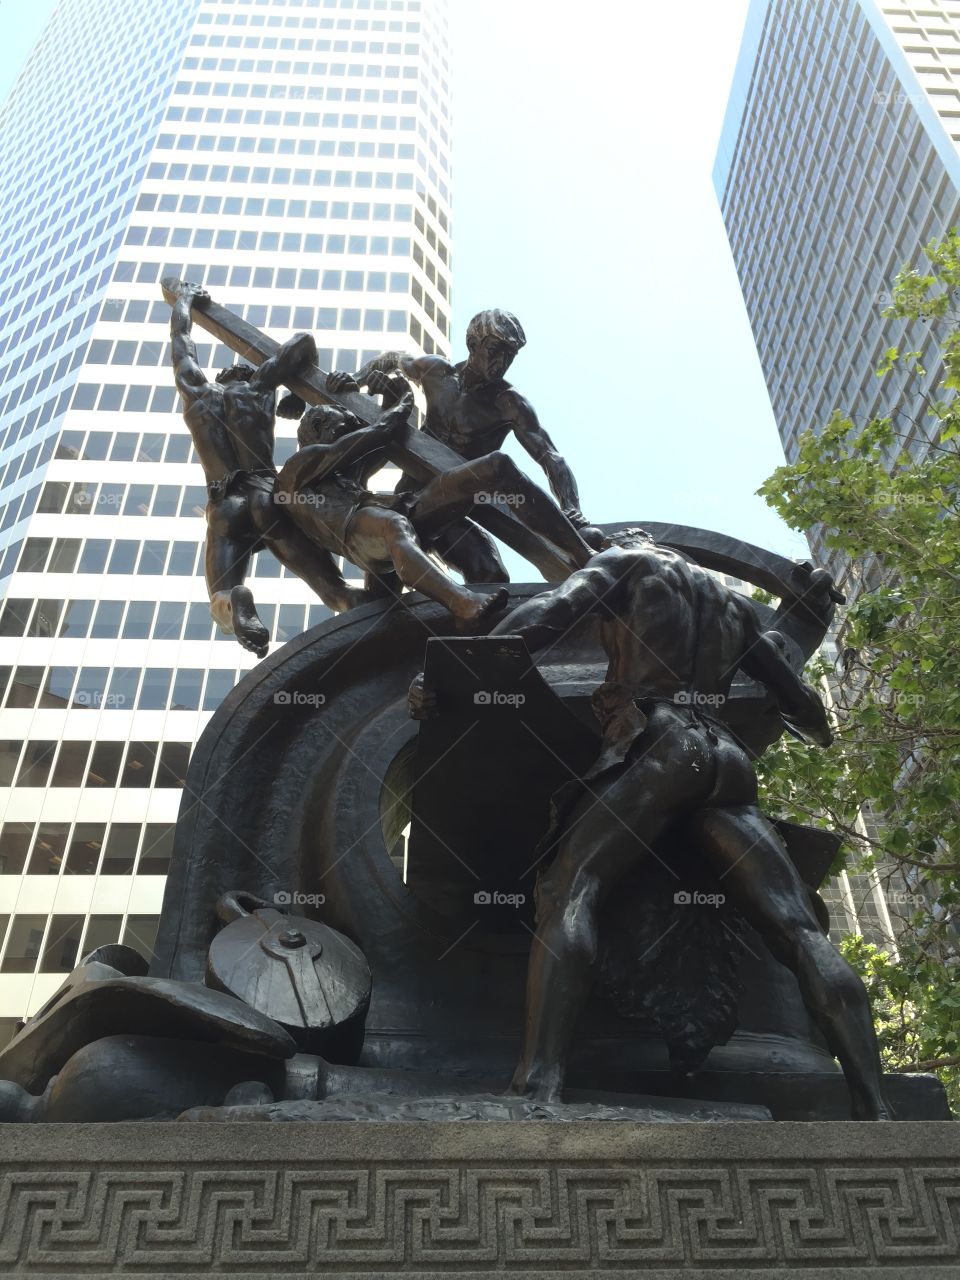 Mechanic Monument in San Francisco . A statue dedicated to mechanics